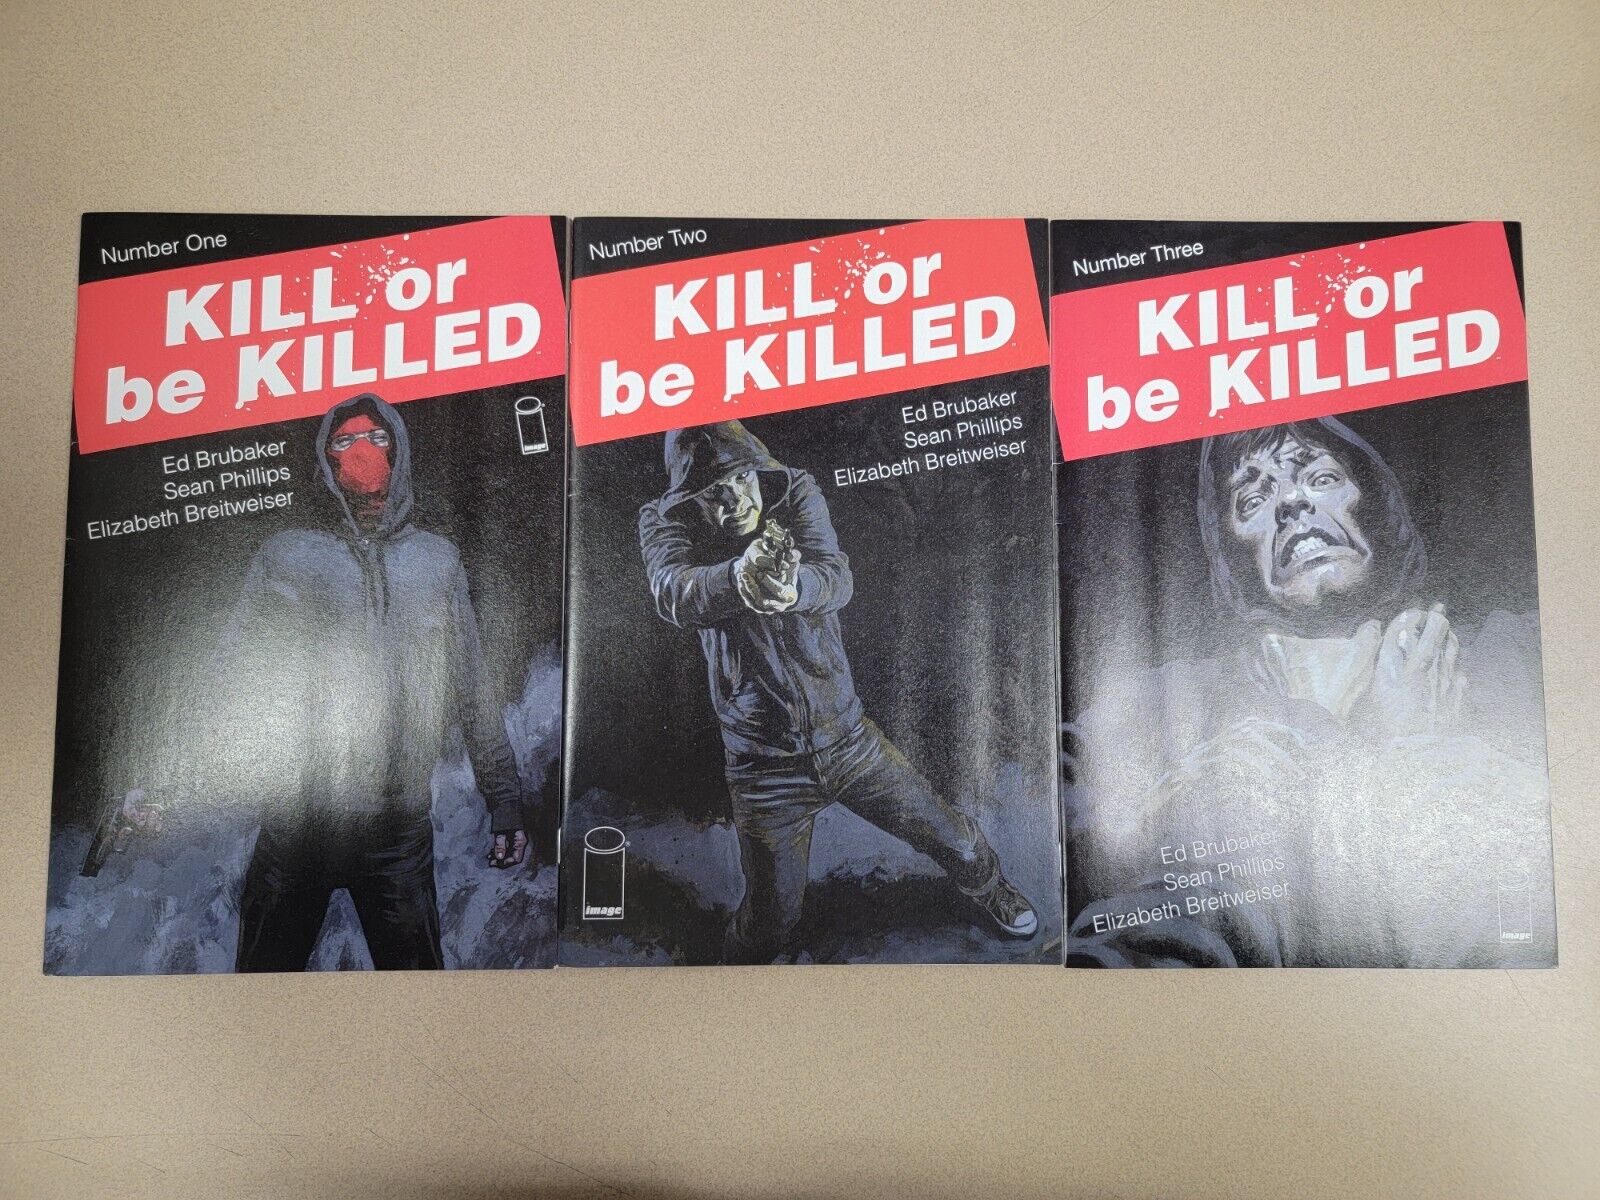 Kill Or Be Killed Vol 1 To 4 #1 To #20 2017-19 Softcover Image Comic Book Set